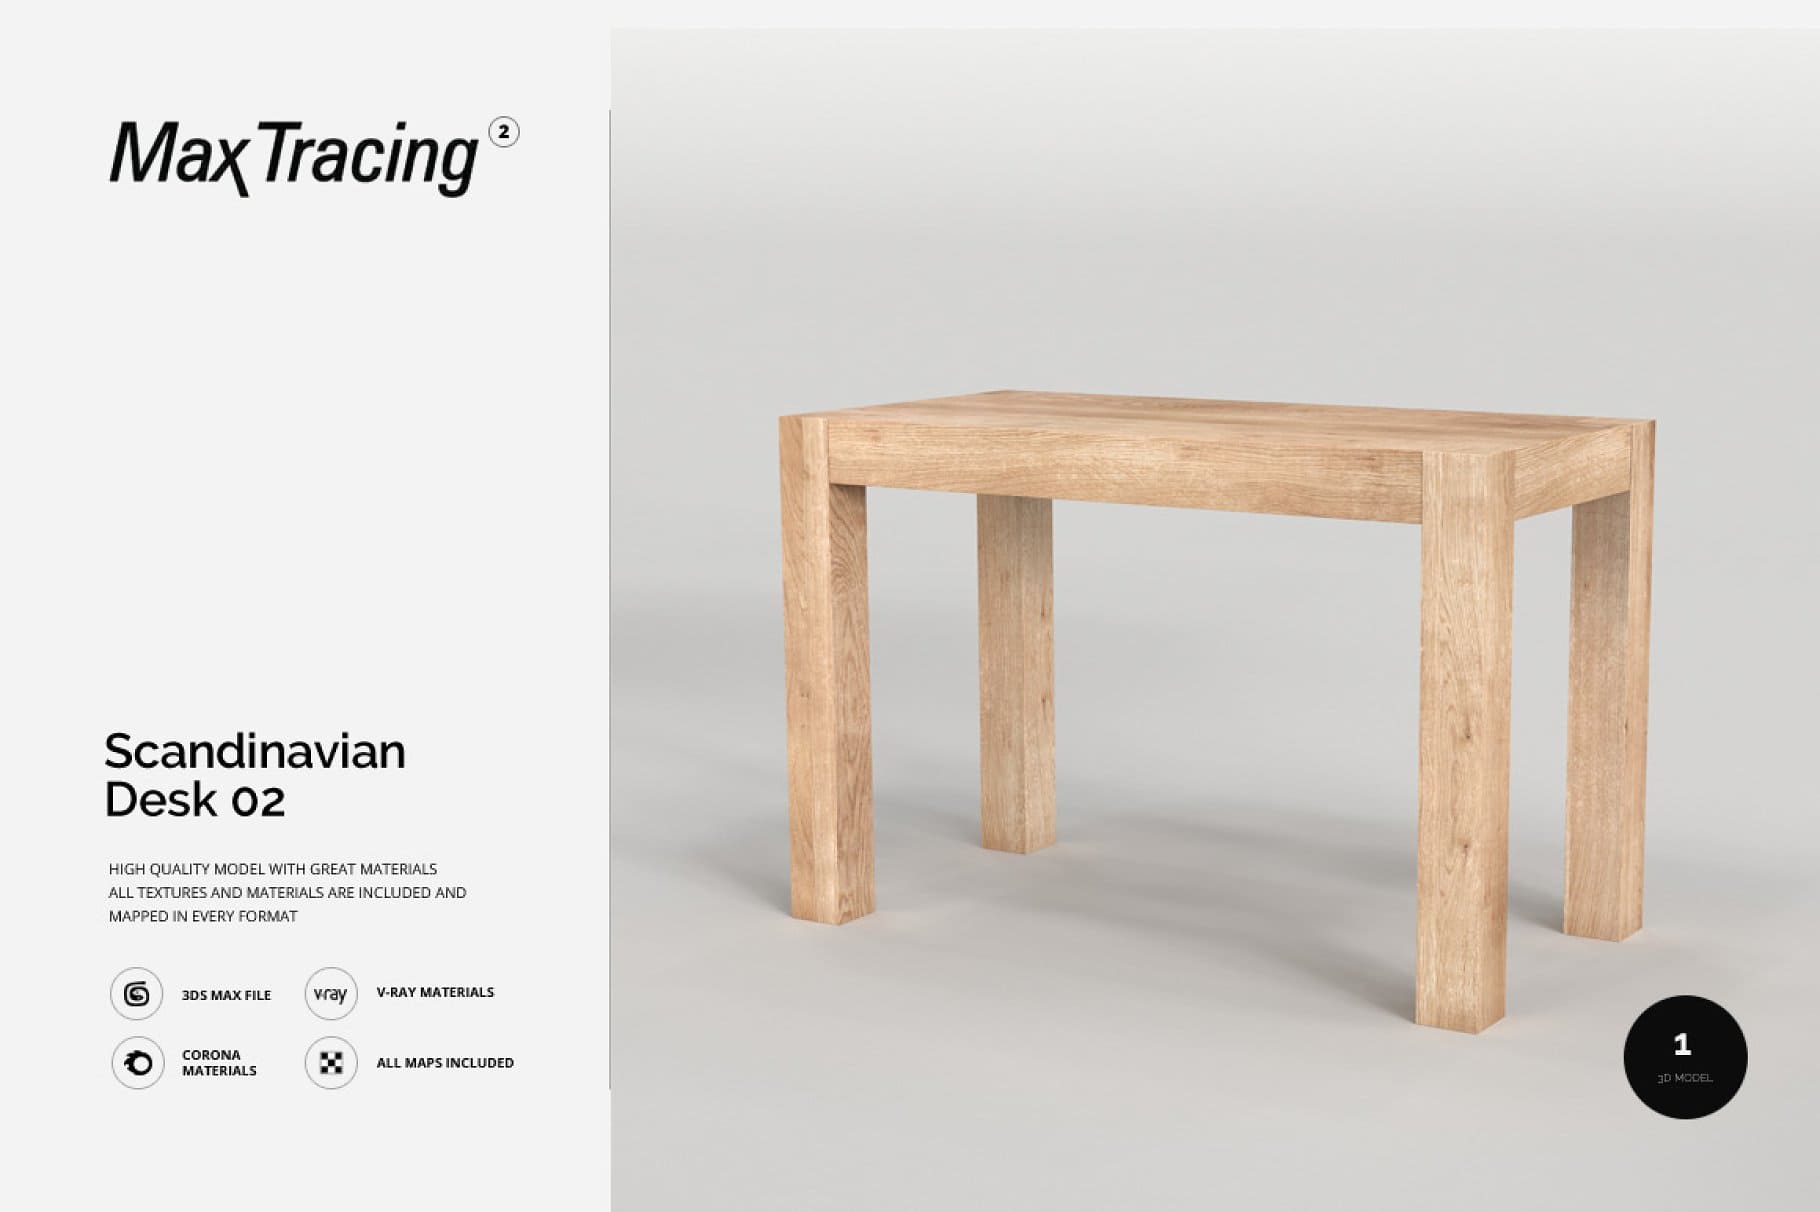 High quality model of Scandinavian desk with great materials.